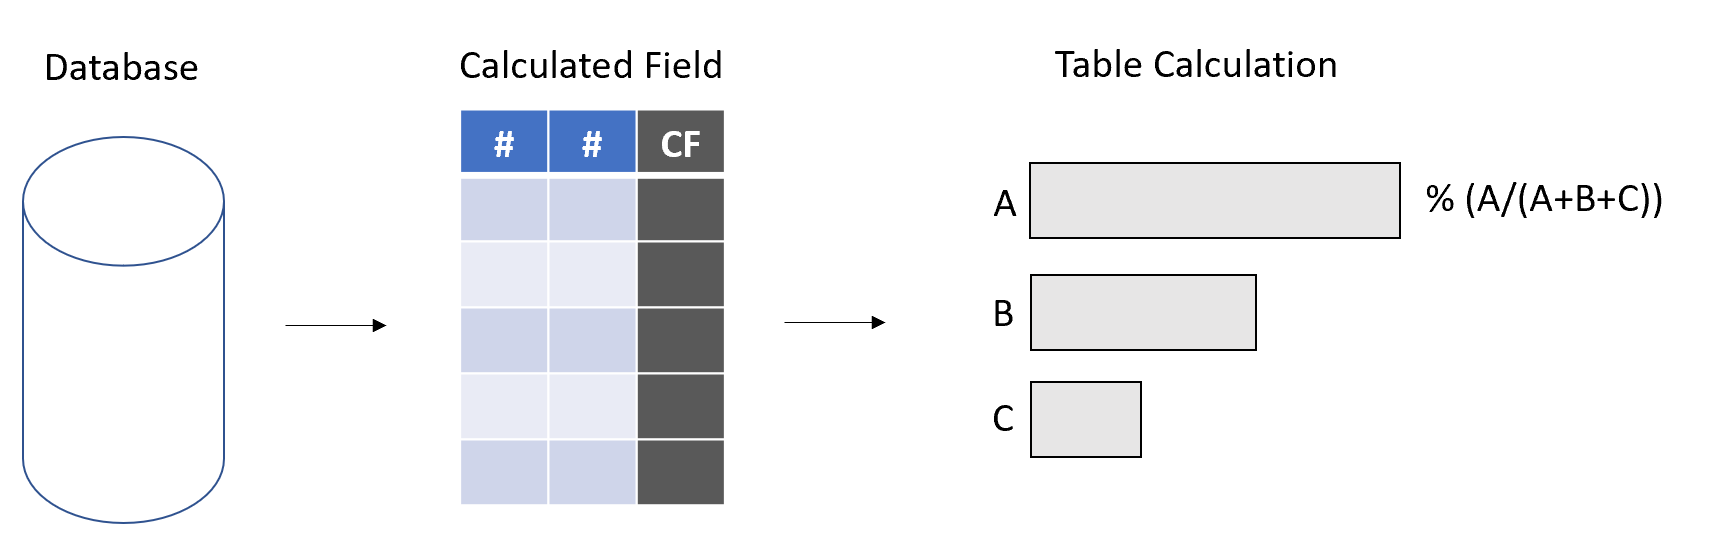 tableau-error-all-fields-must-be-aggregate-or-constant-when-using-table-calculation-functions